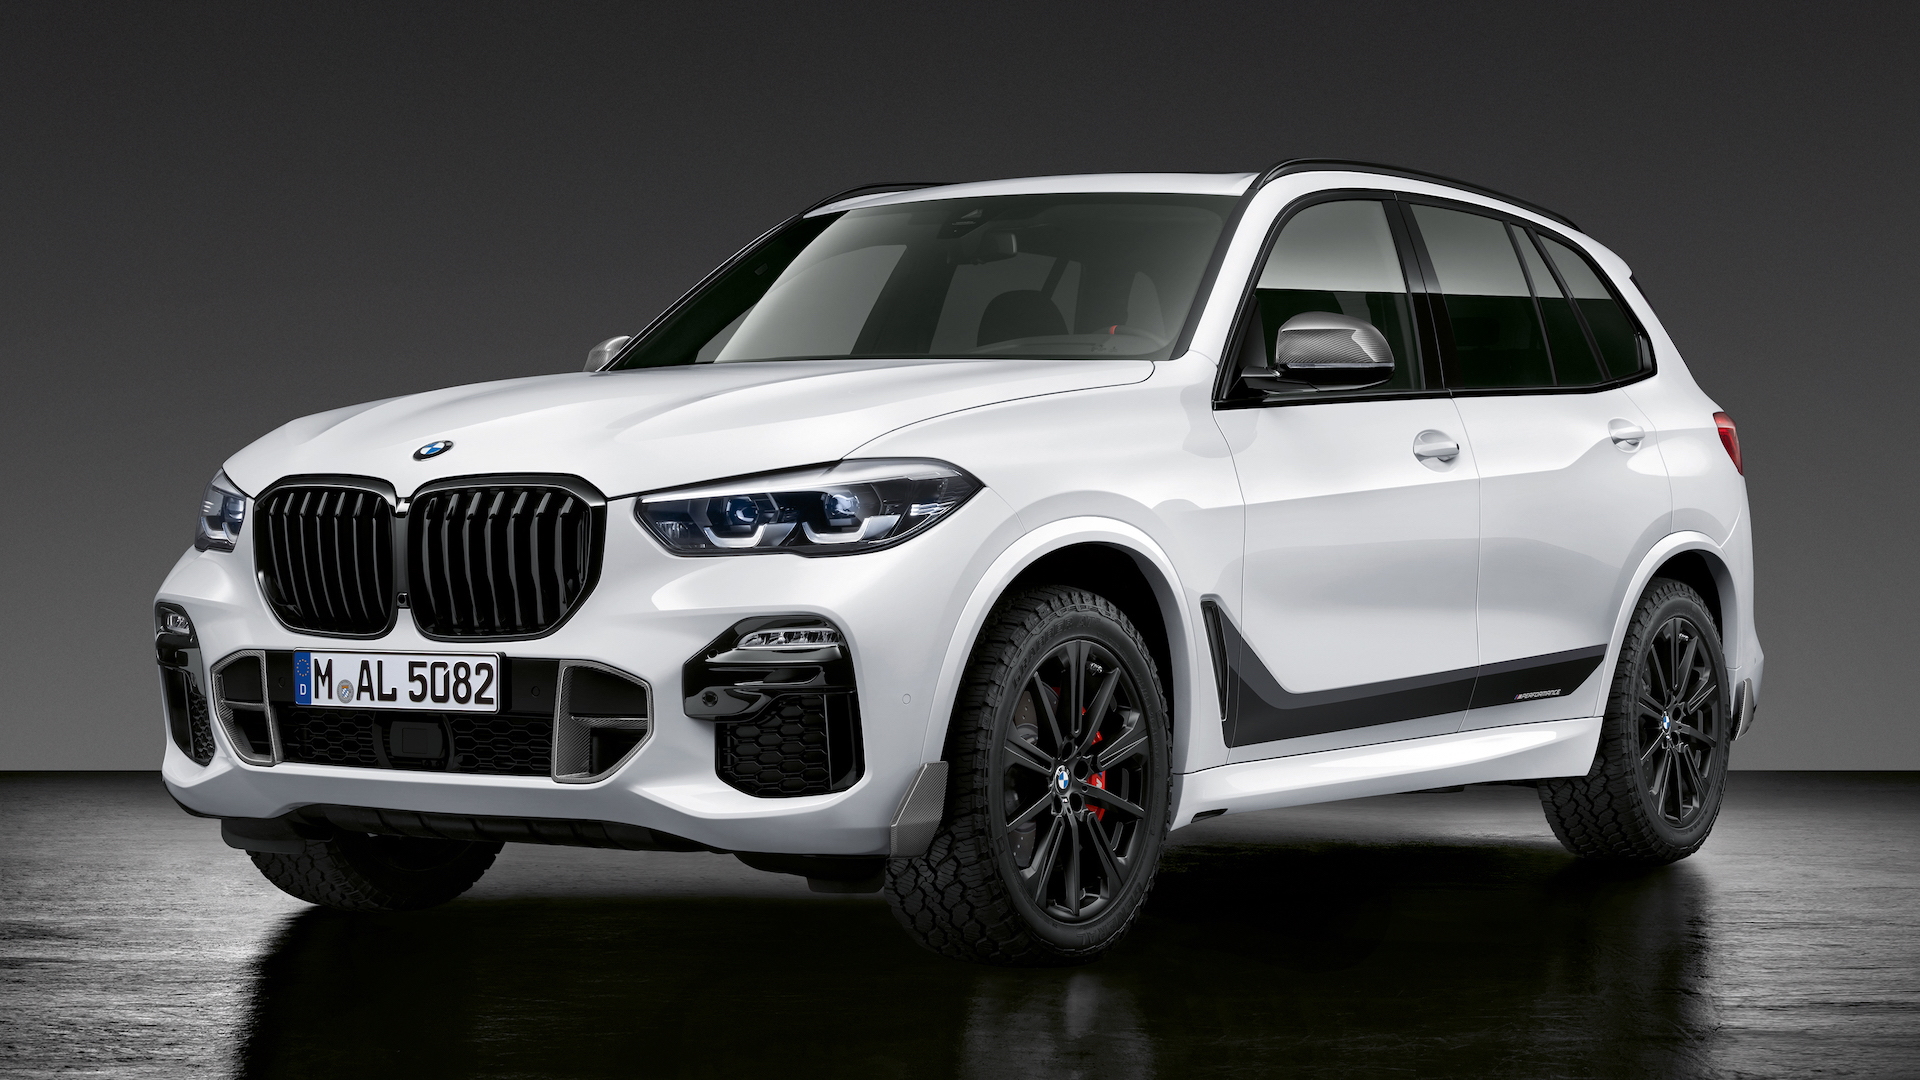 BMW shows off M performance parts for 2019 X5